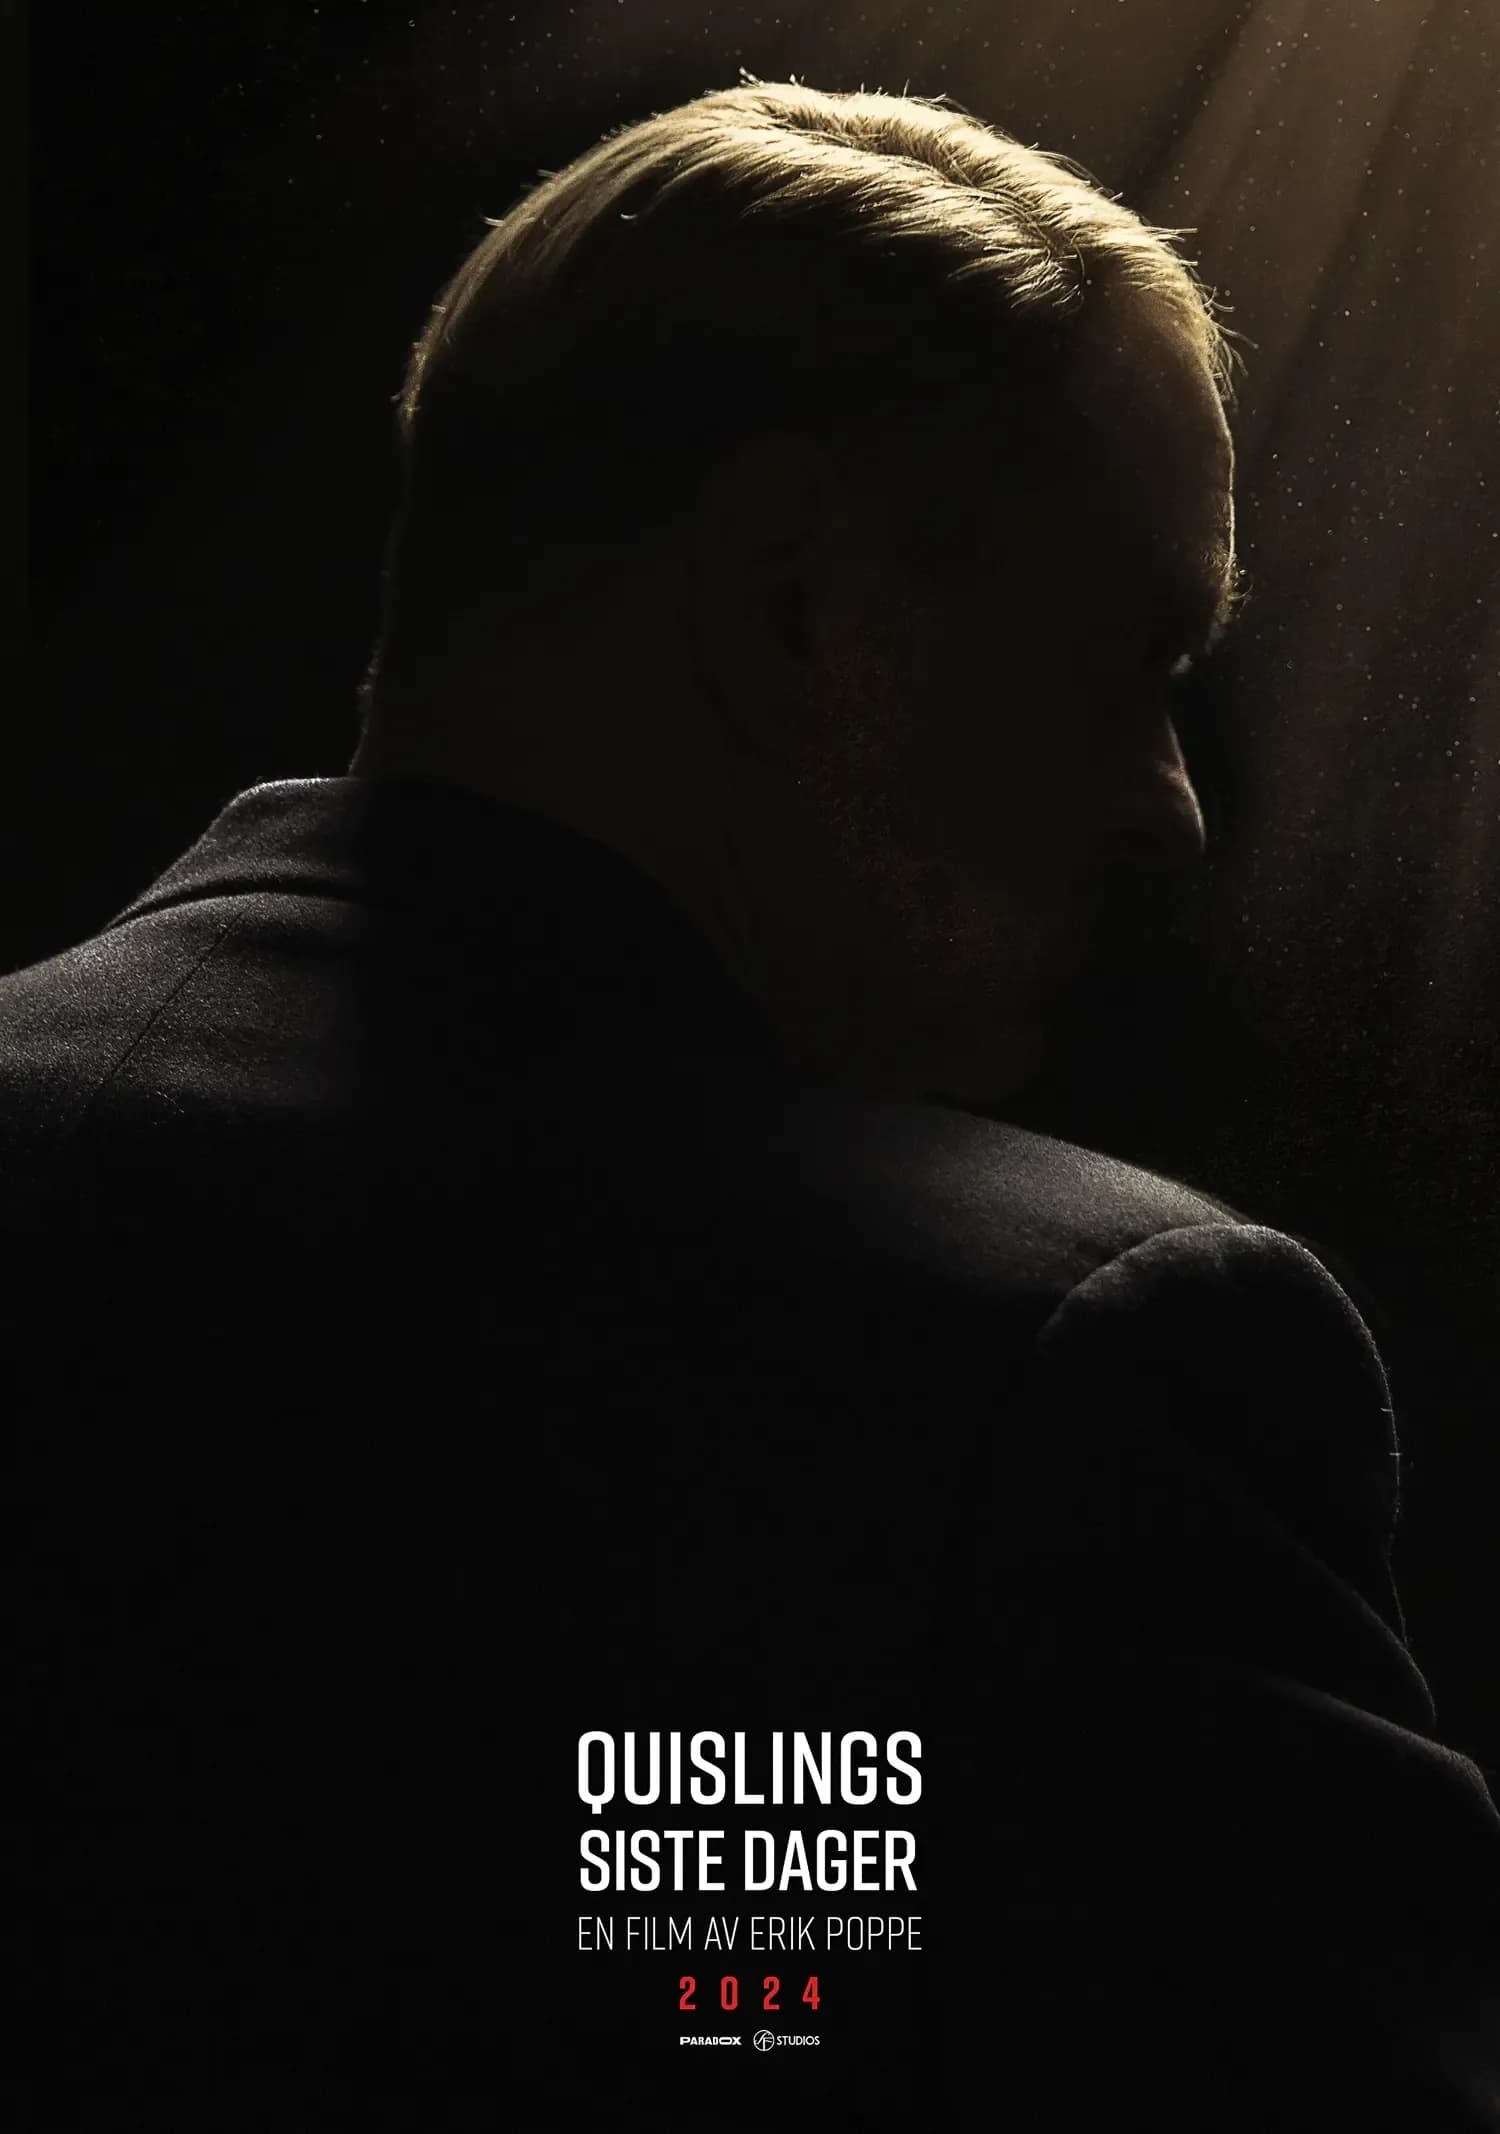 Quisling: The Final Days